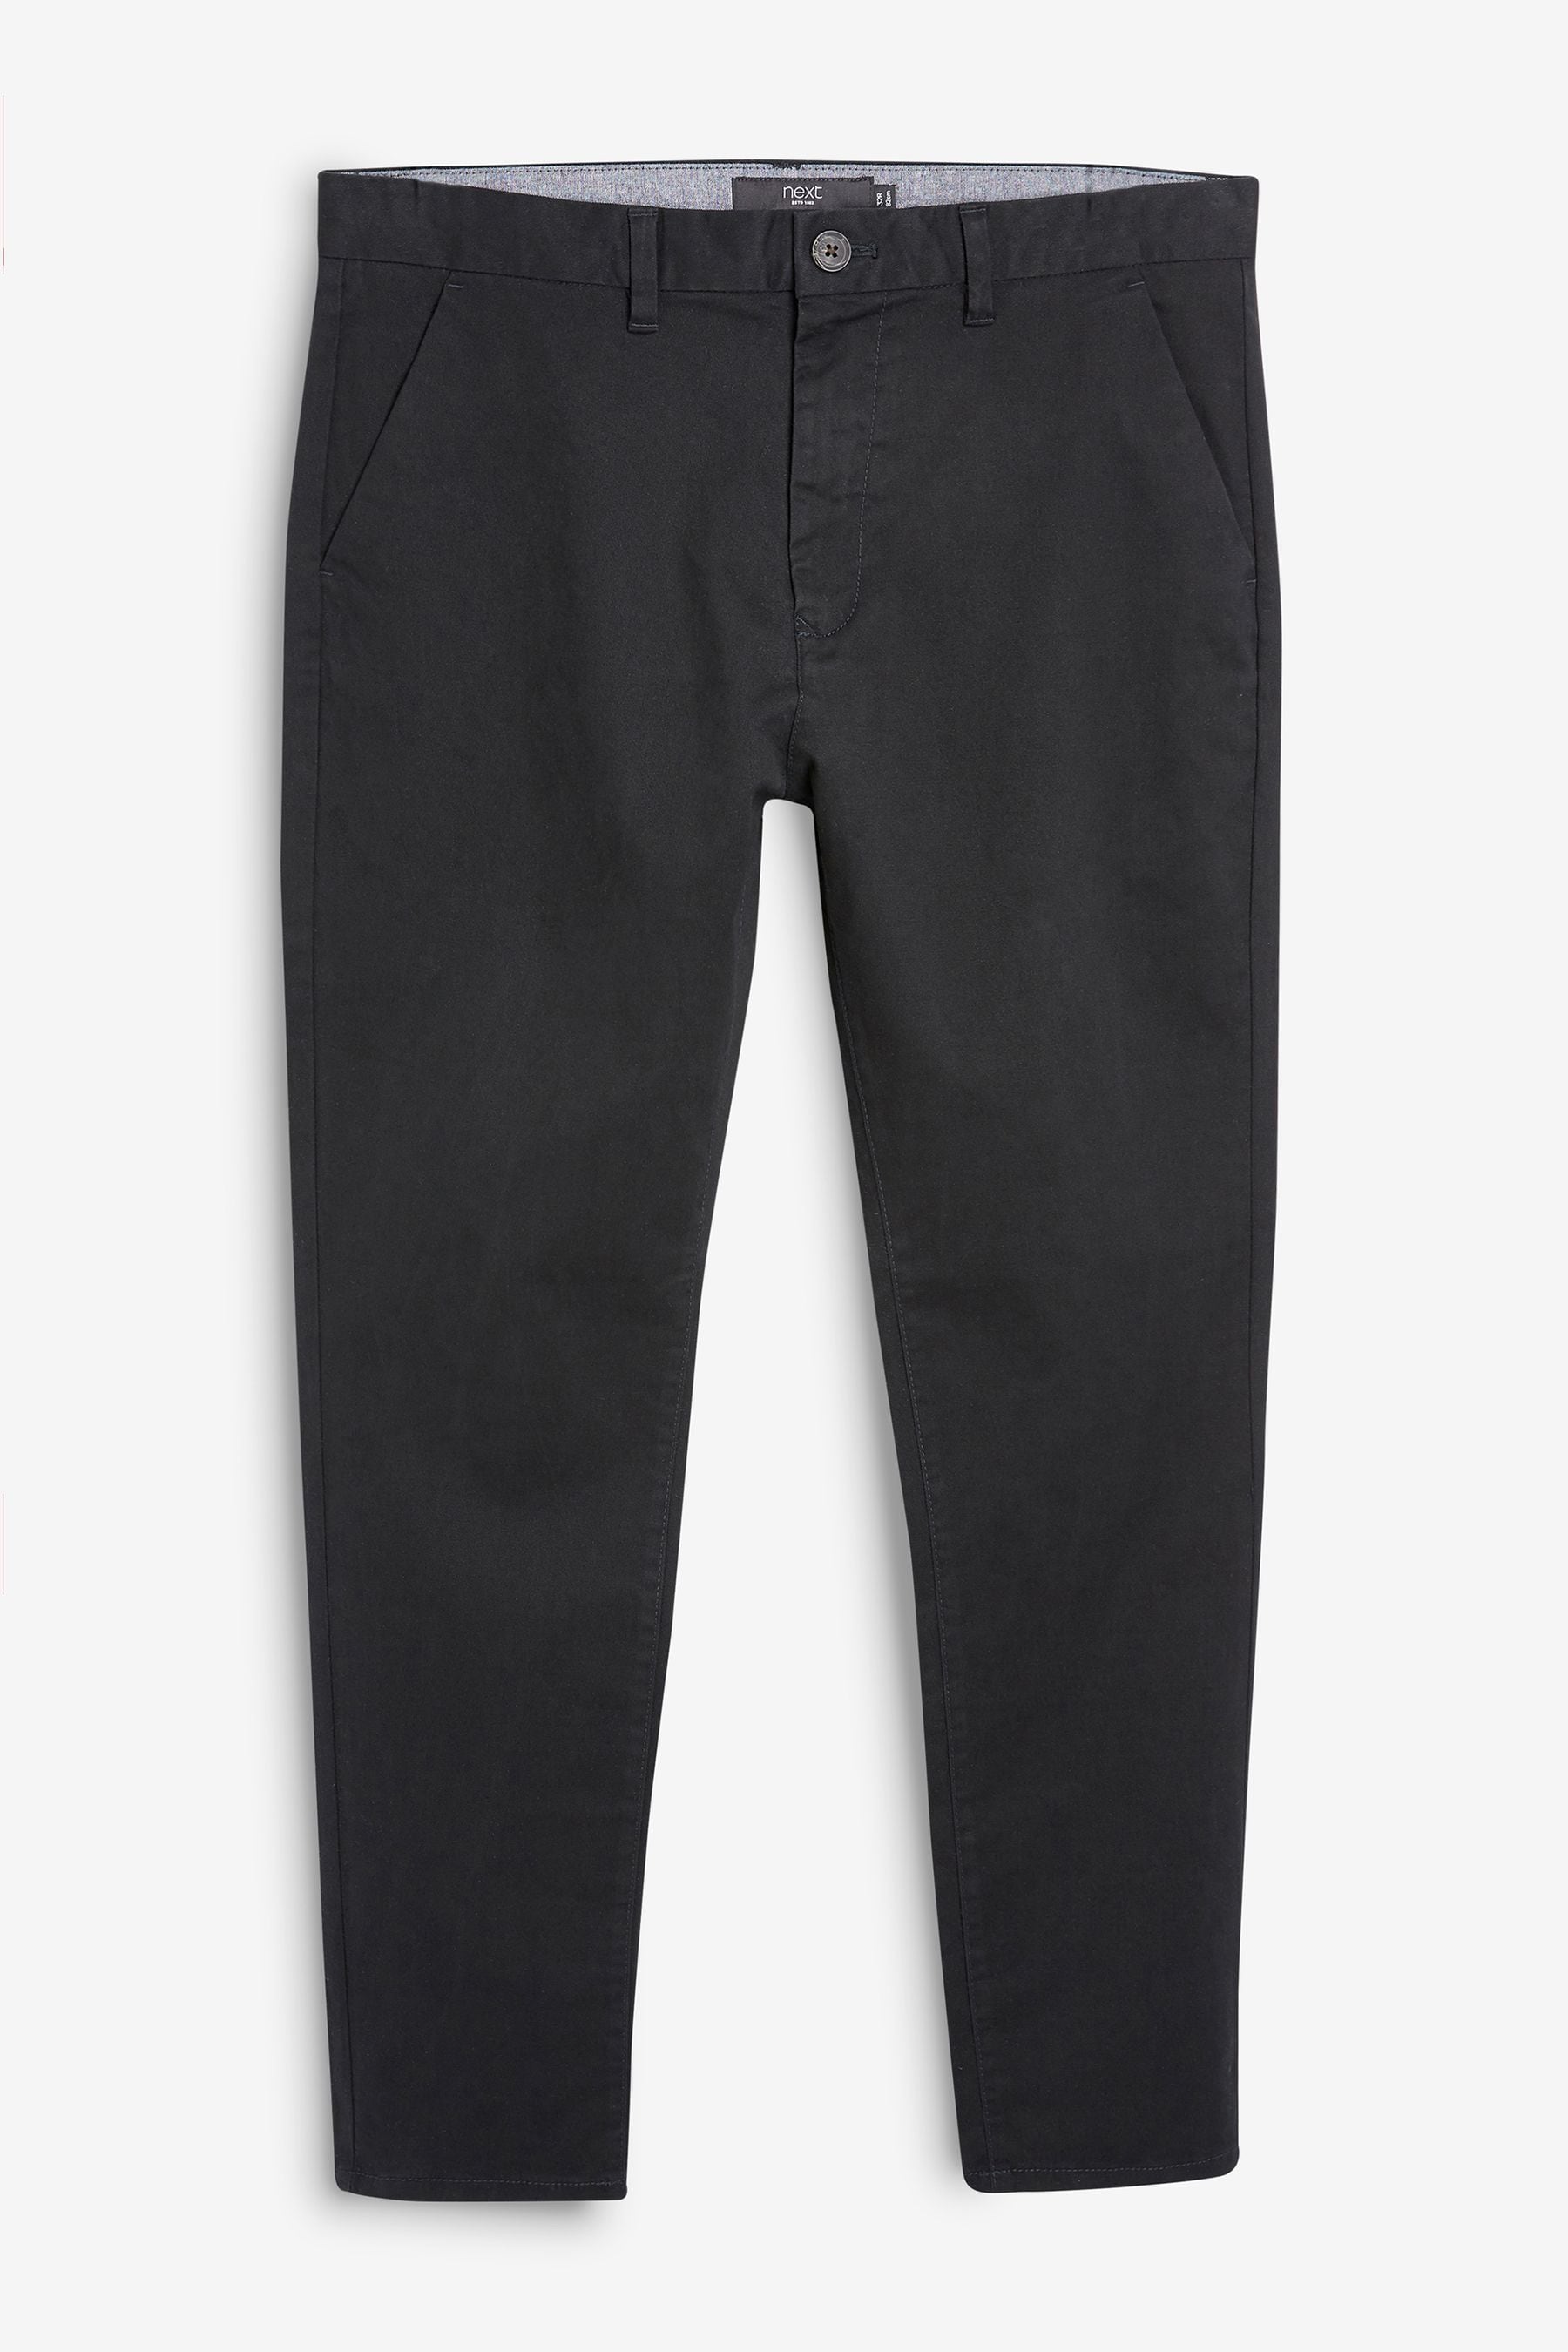 Buy Black Slim Tapered Stretch Chino Trousers from the Next UK online shop